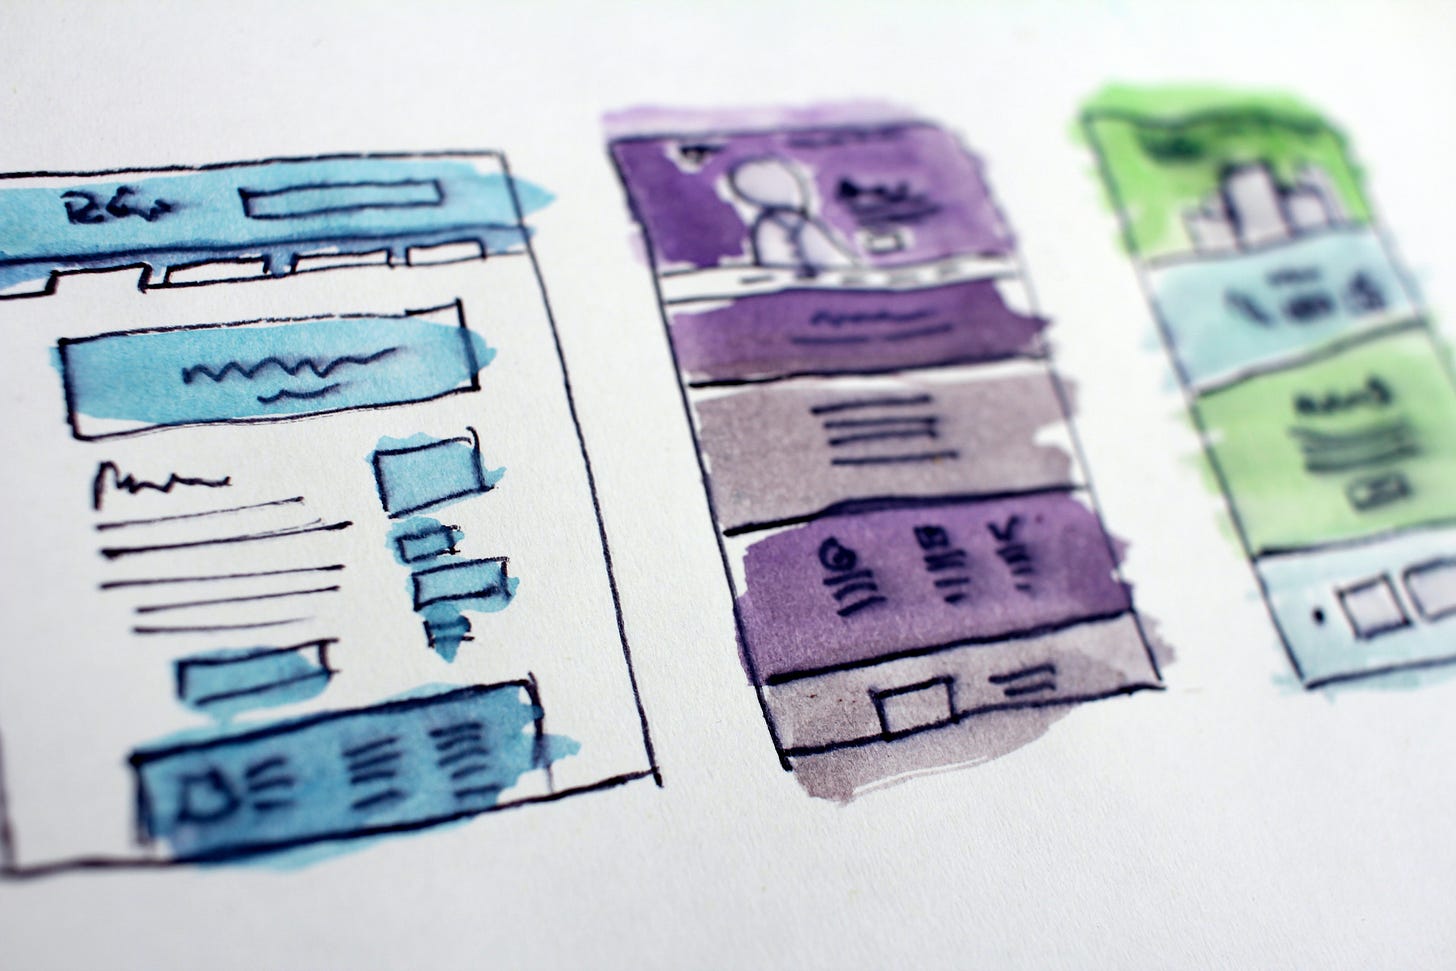 Watercolor boxes with scribbles in them that look like plans or layouts of websites